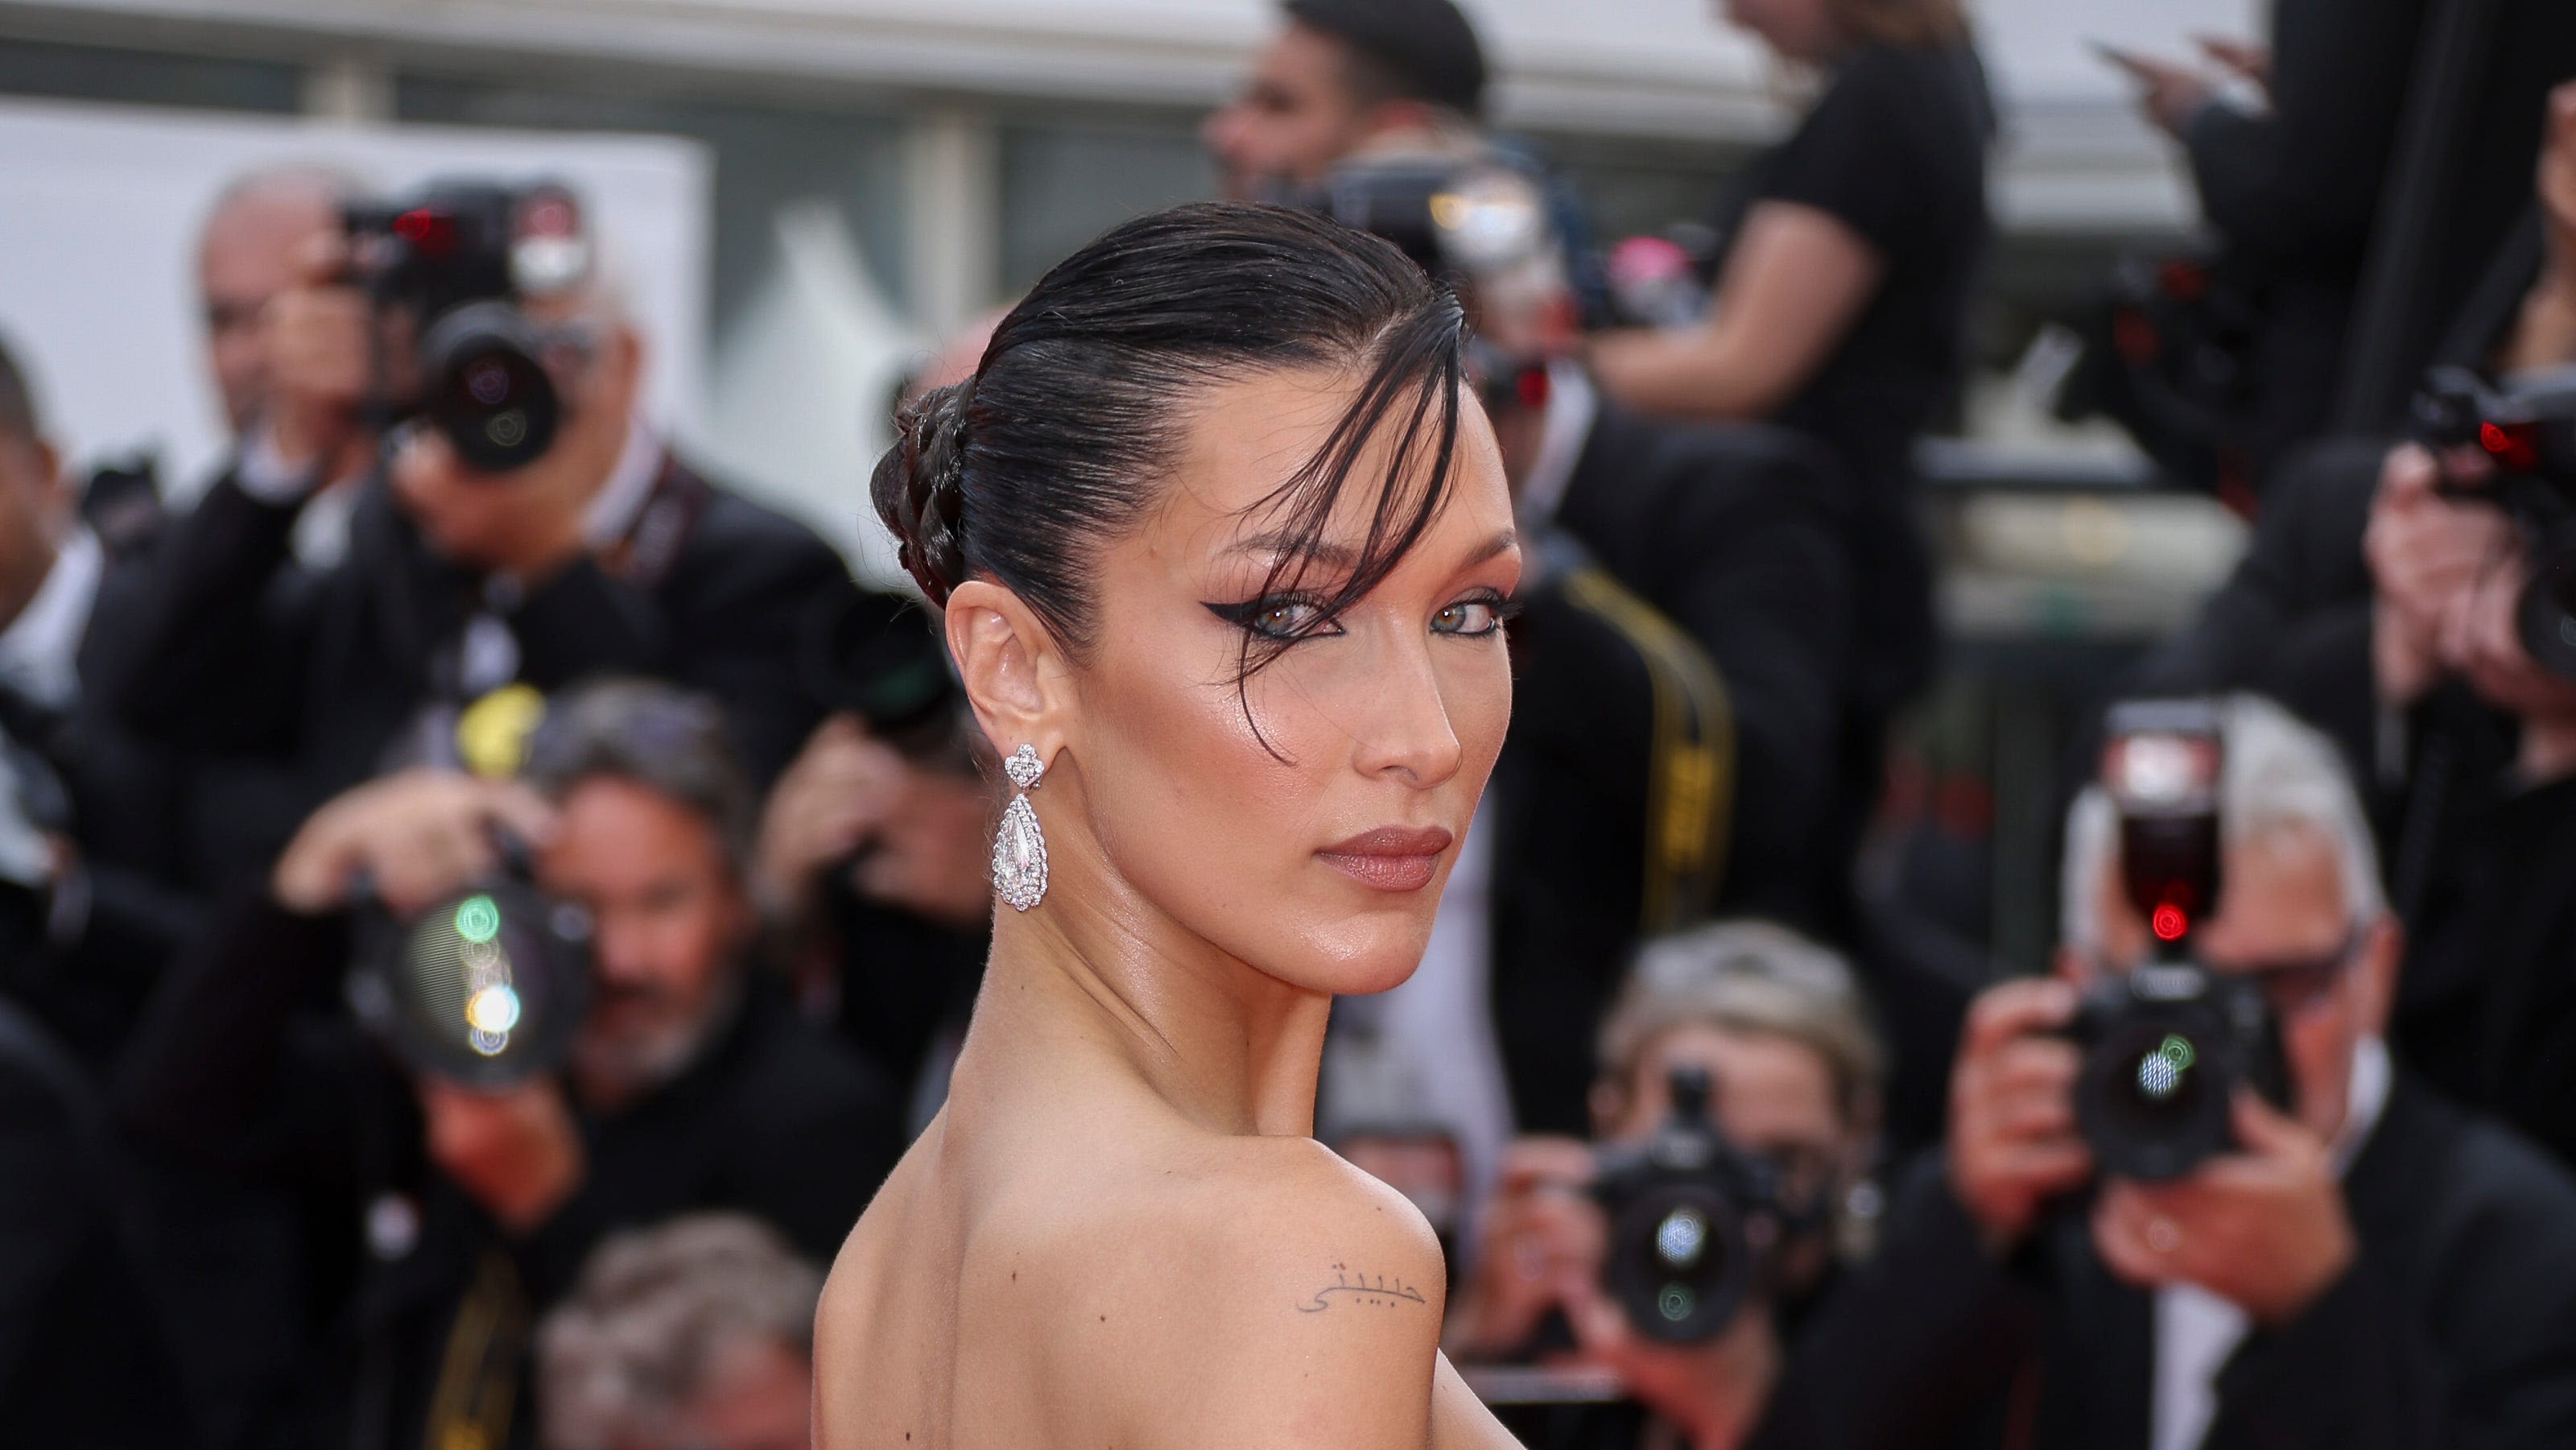 Model Bella Hadid now lives in Fort Worth. Here are other celebrities who call Texas home.